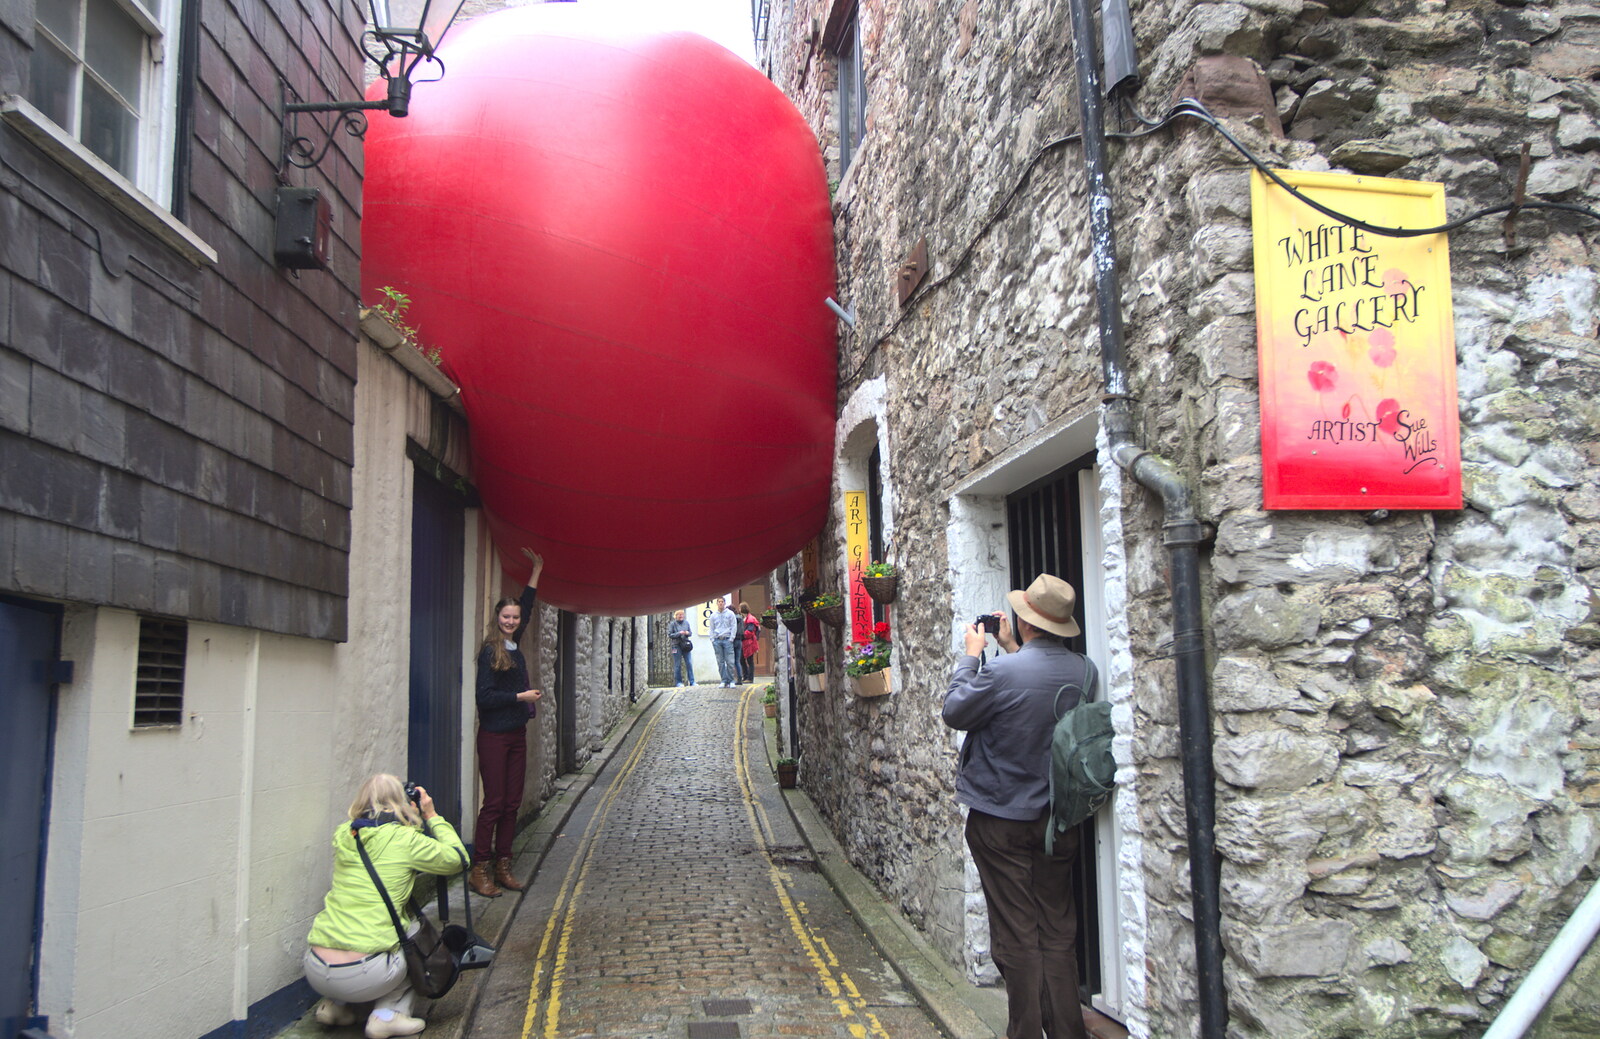 The Red Ball has moved along to White Lane from A Visit to the Aquarium, The Barbican and Dartmoor, Plymouth, Devon - 10th June 2012